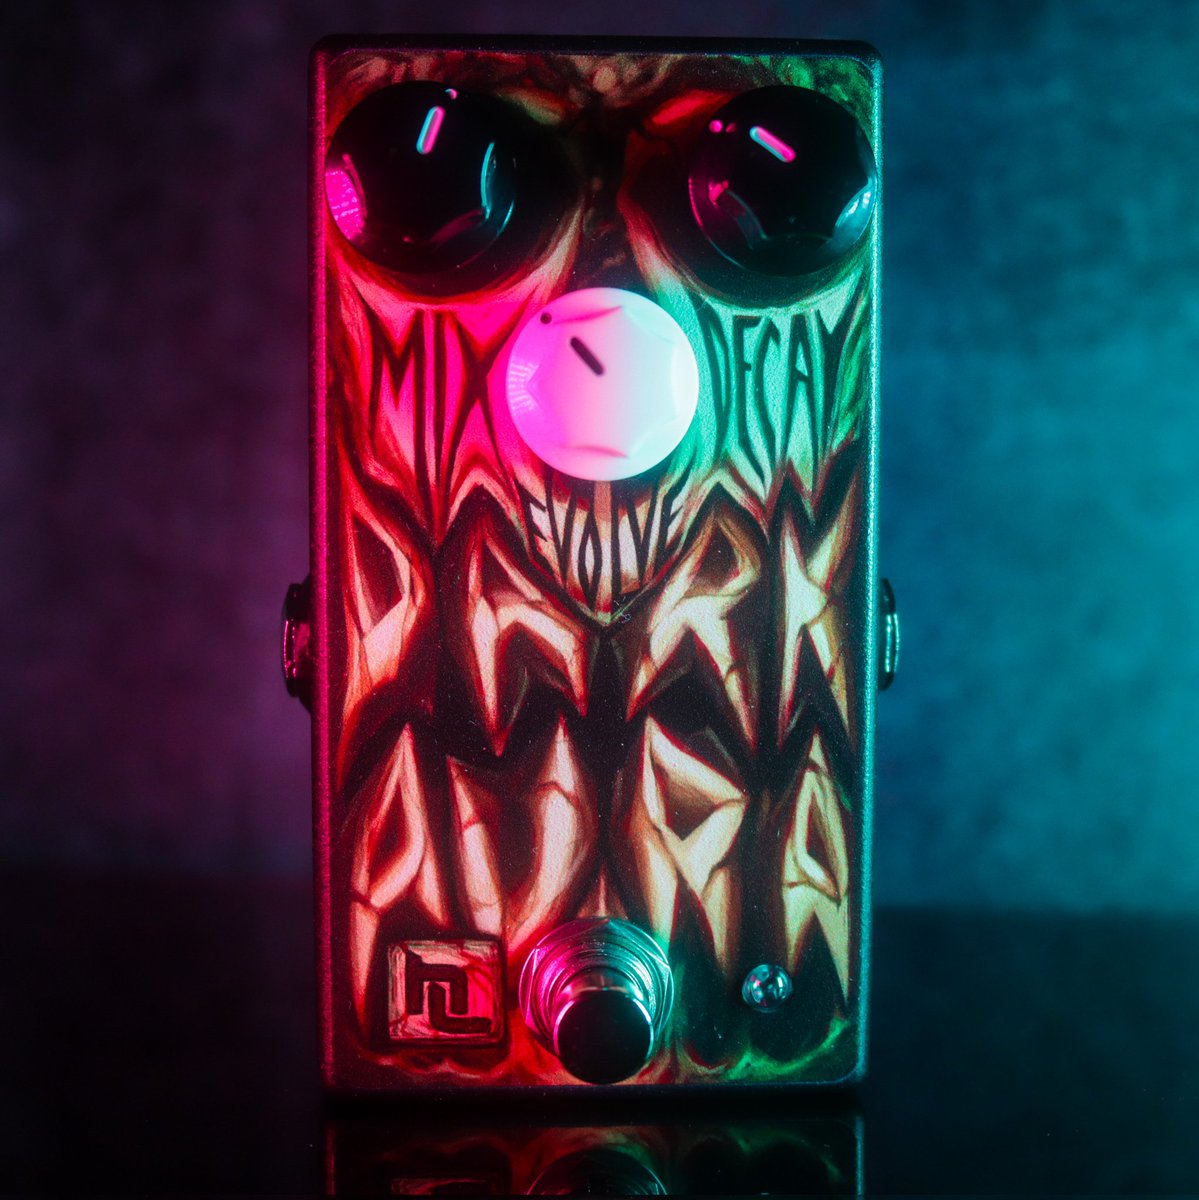 Exploring a vast spectrum of blissful ambience with the Dark Aura reverb tonight! Who else is dwelling in reverb land?

#knowyourtone #guitarpedals #reverb #reverbpedal #effectspedals #guitareffects #guitarfx #stompbox